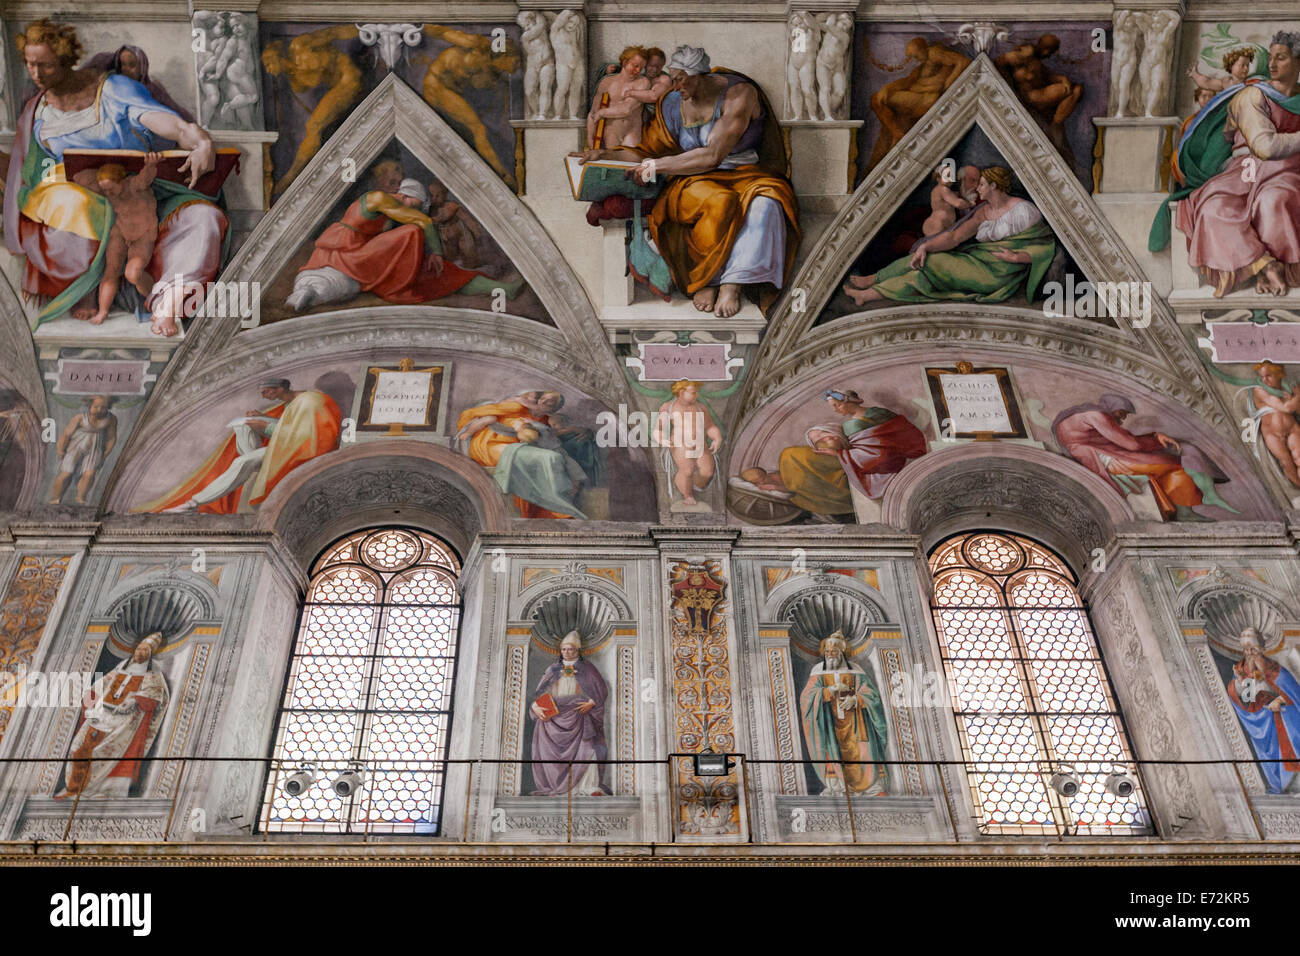 The Sistine Chapel Ceiling Painted By Michelangelo And The North